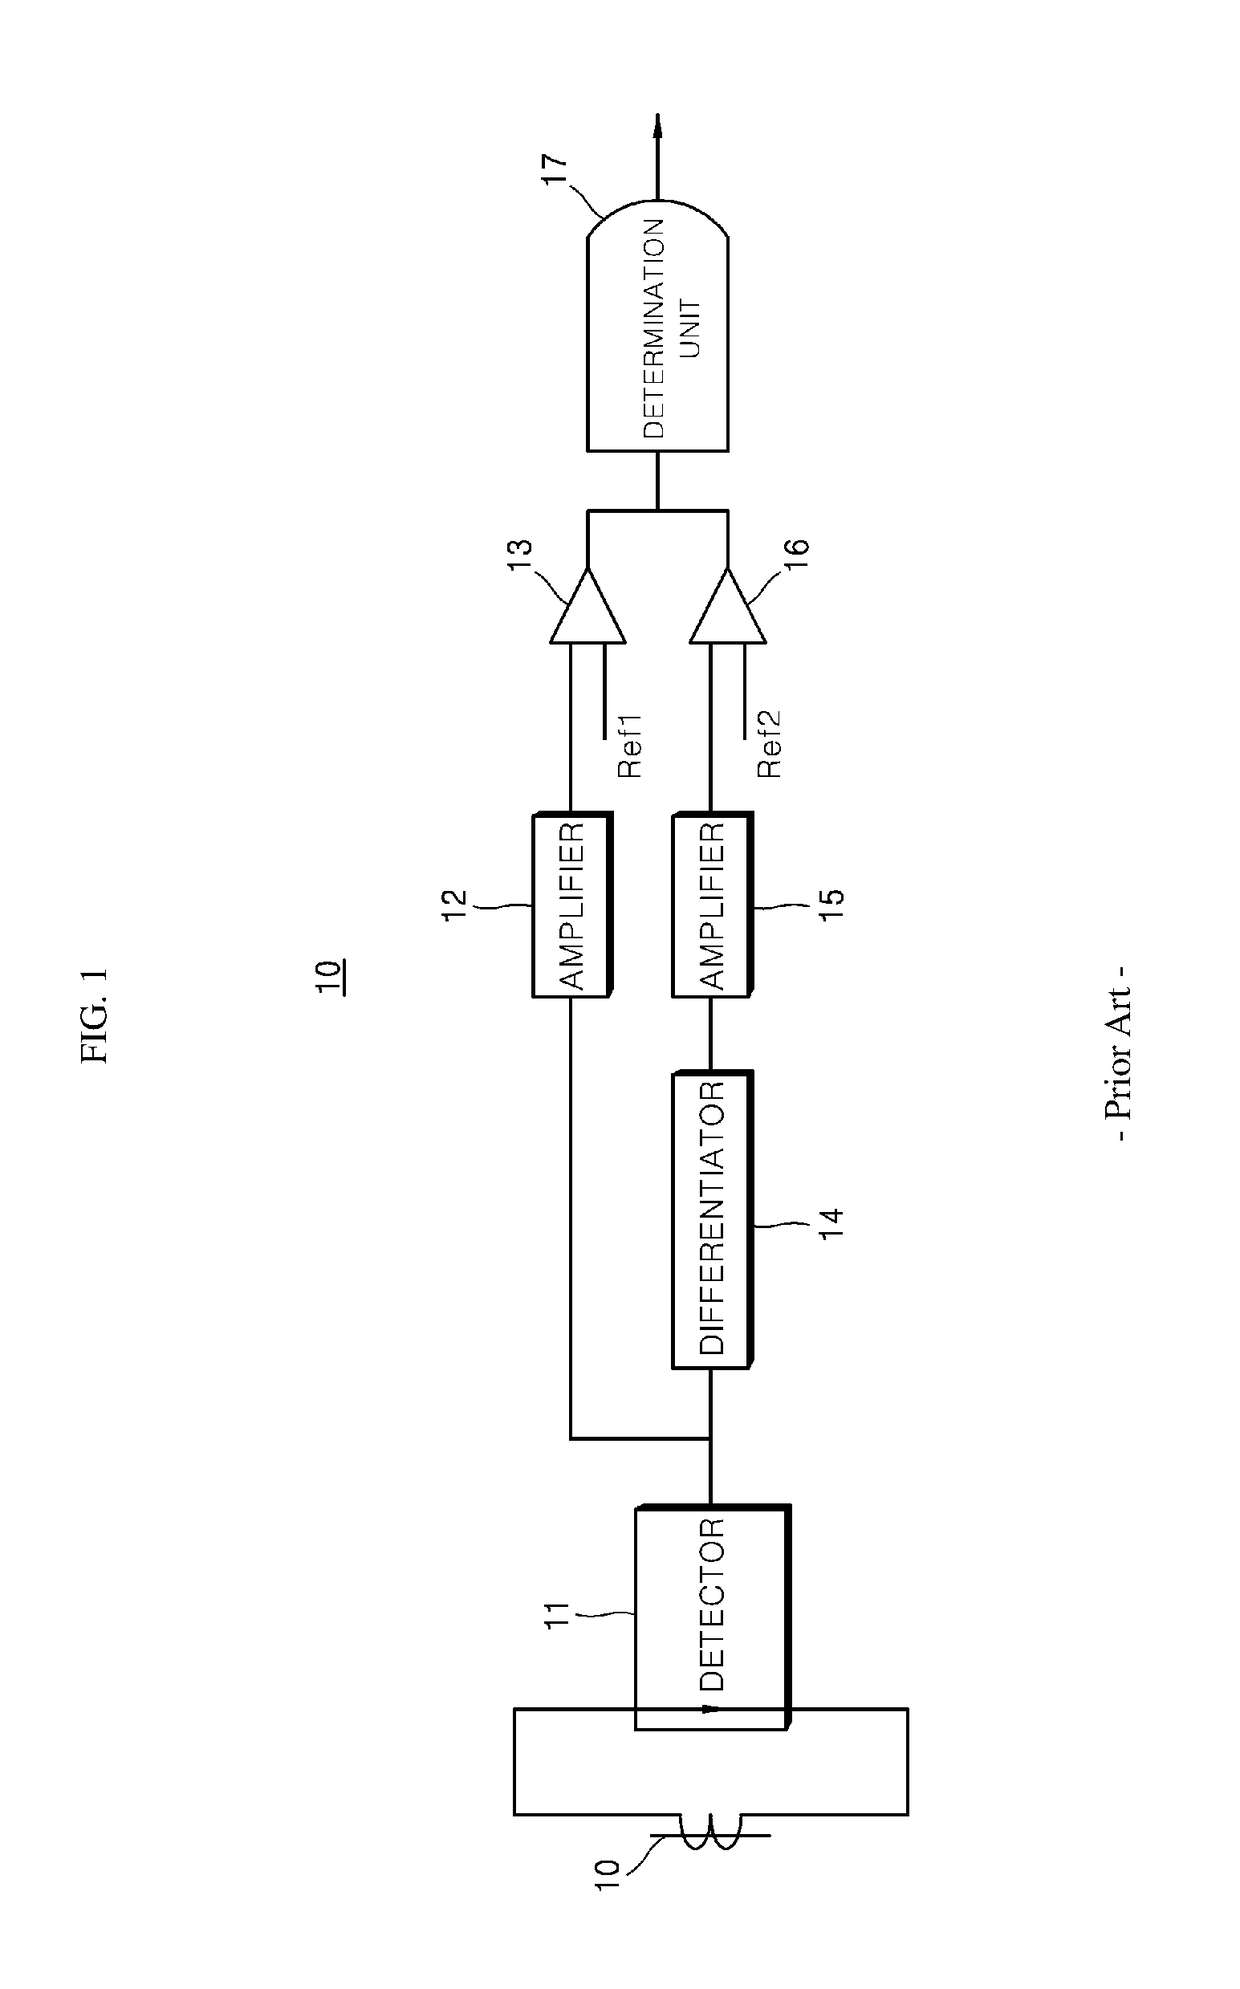 Apparatus for Detecting Defect of Electric Power System